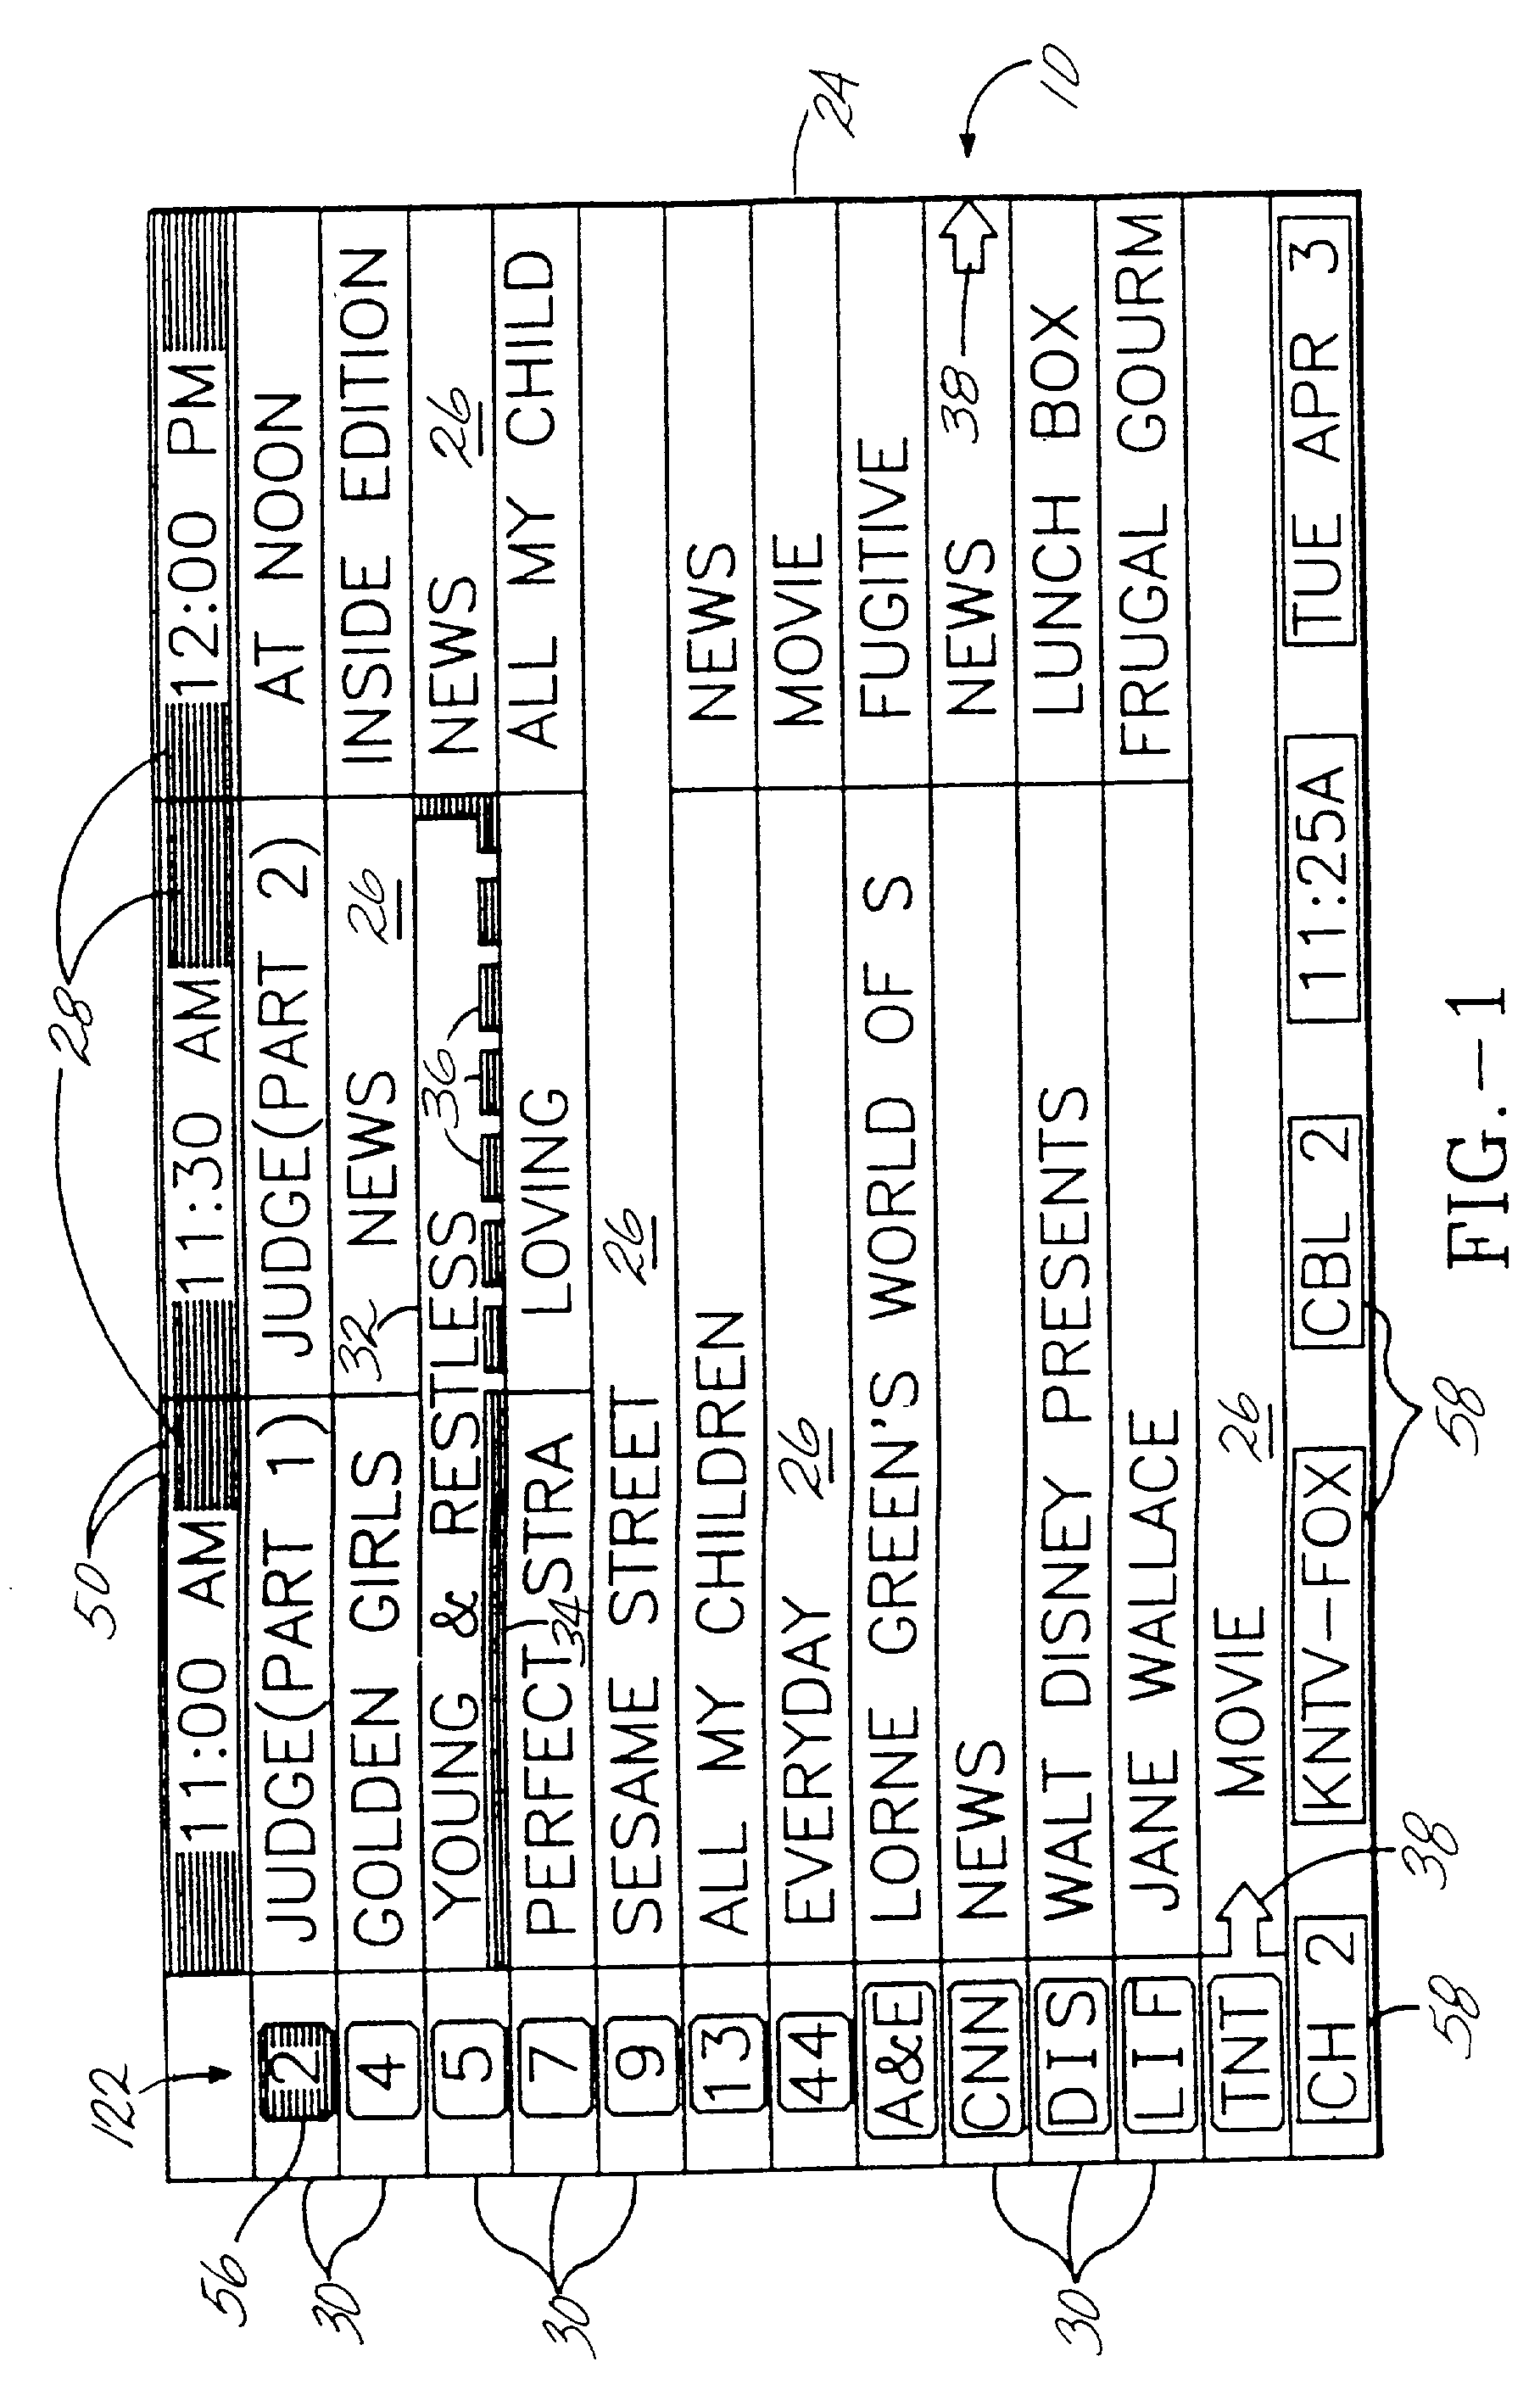 User interface for television schedule system